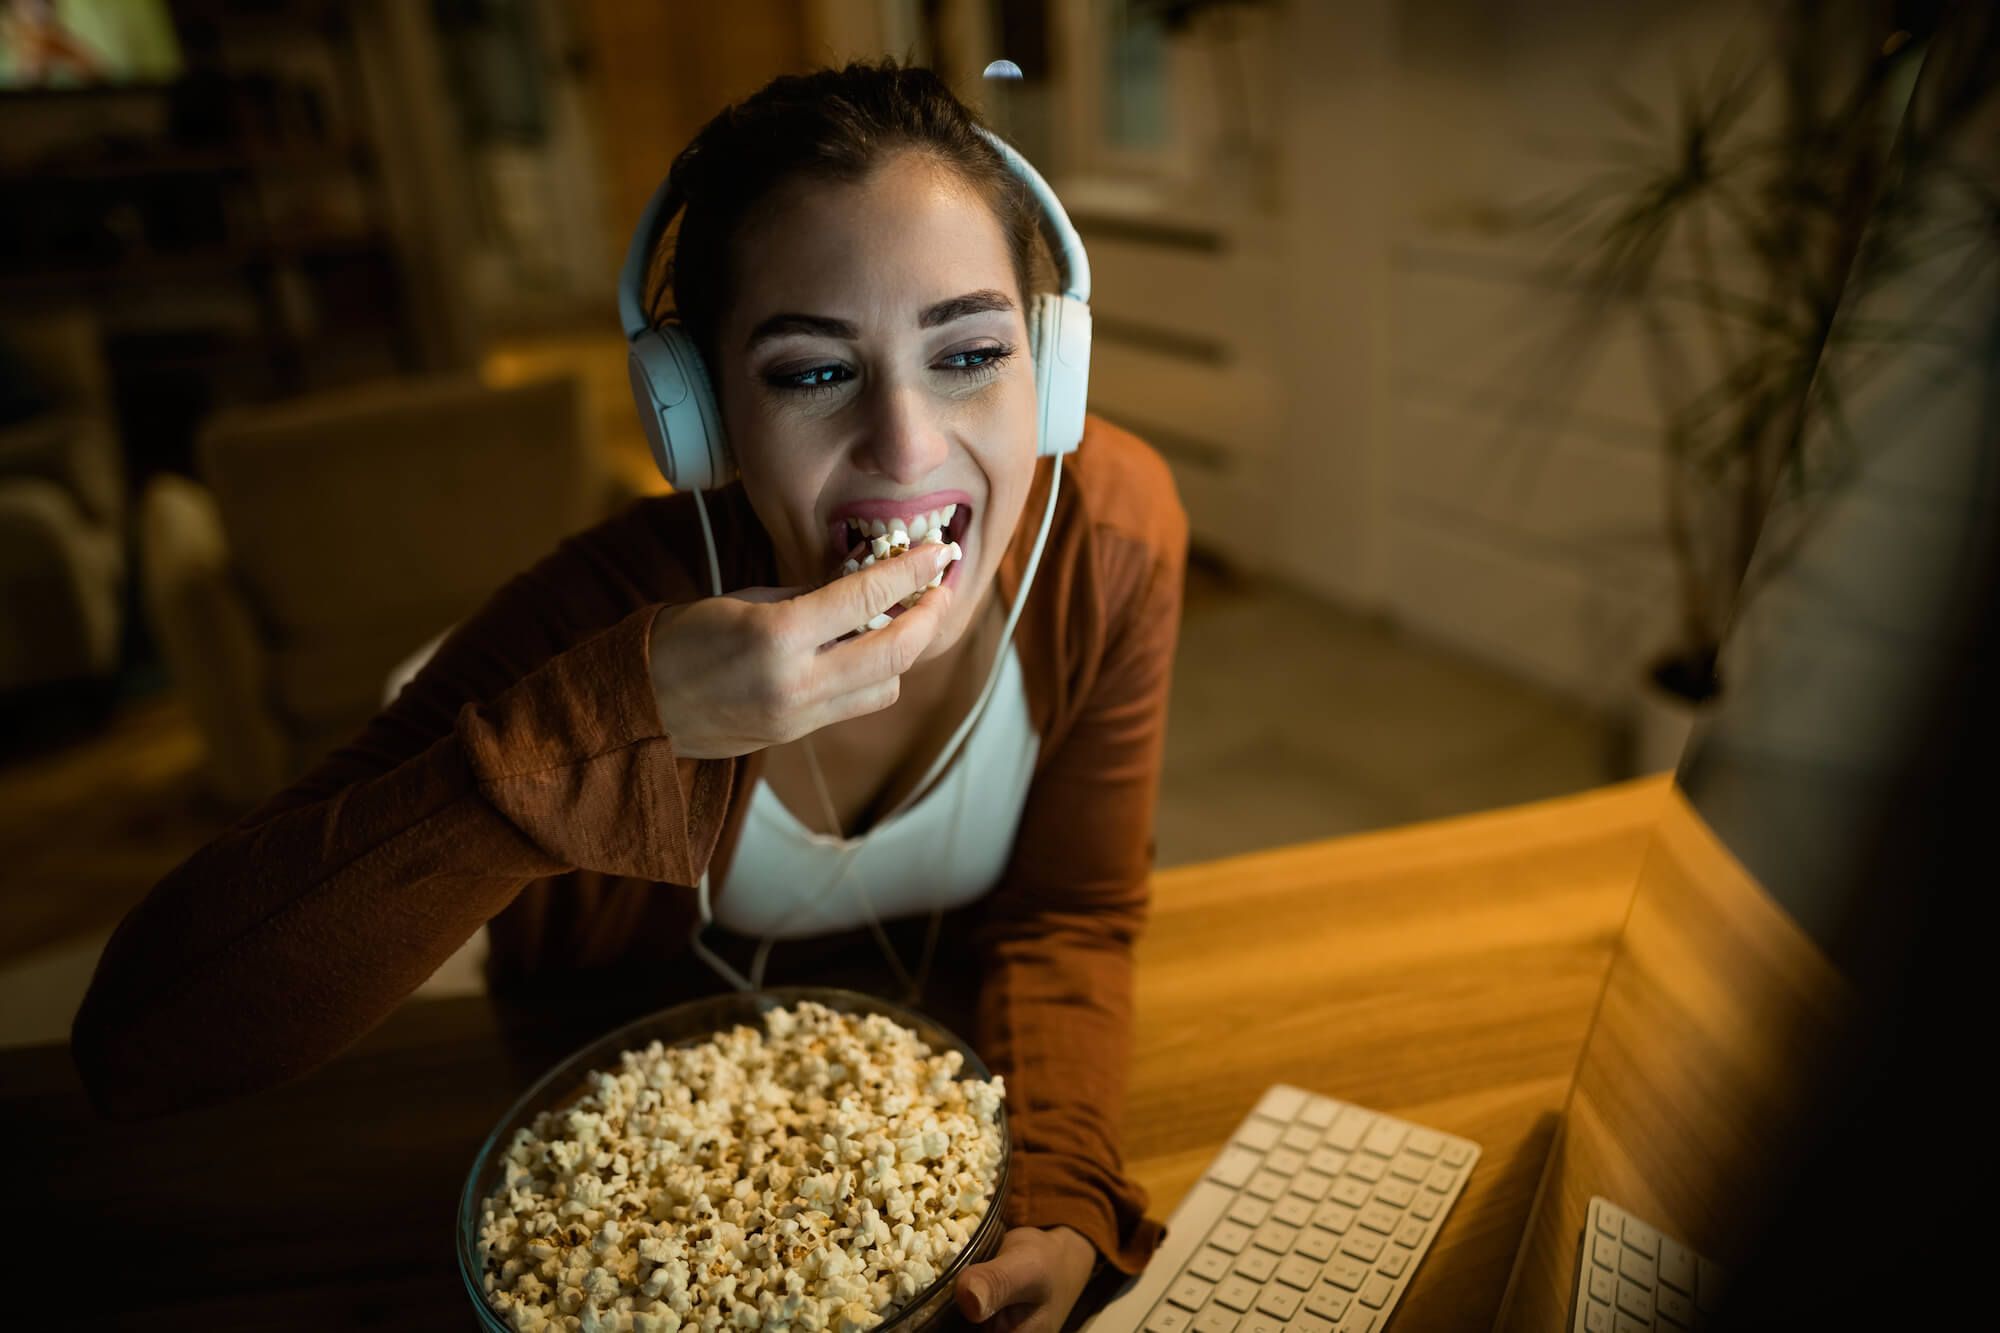 A young woman with headphones eating popcorn